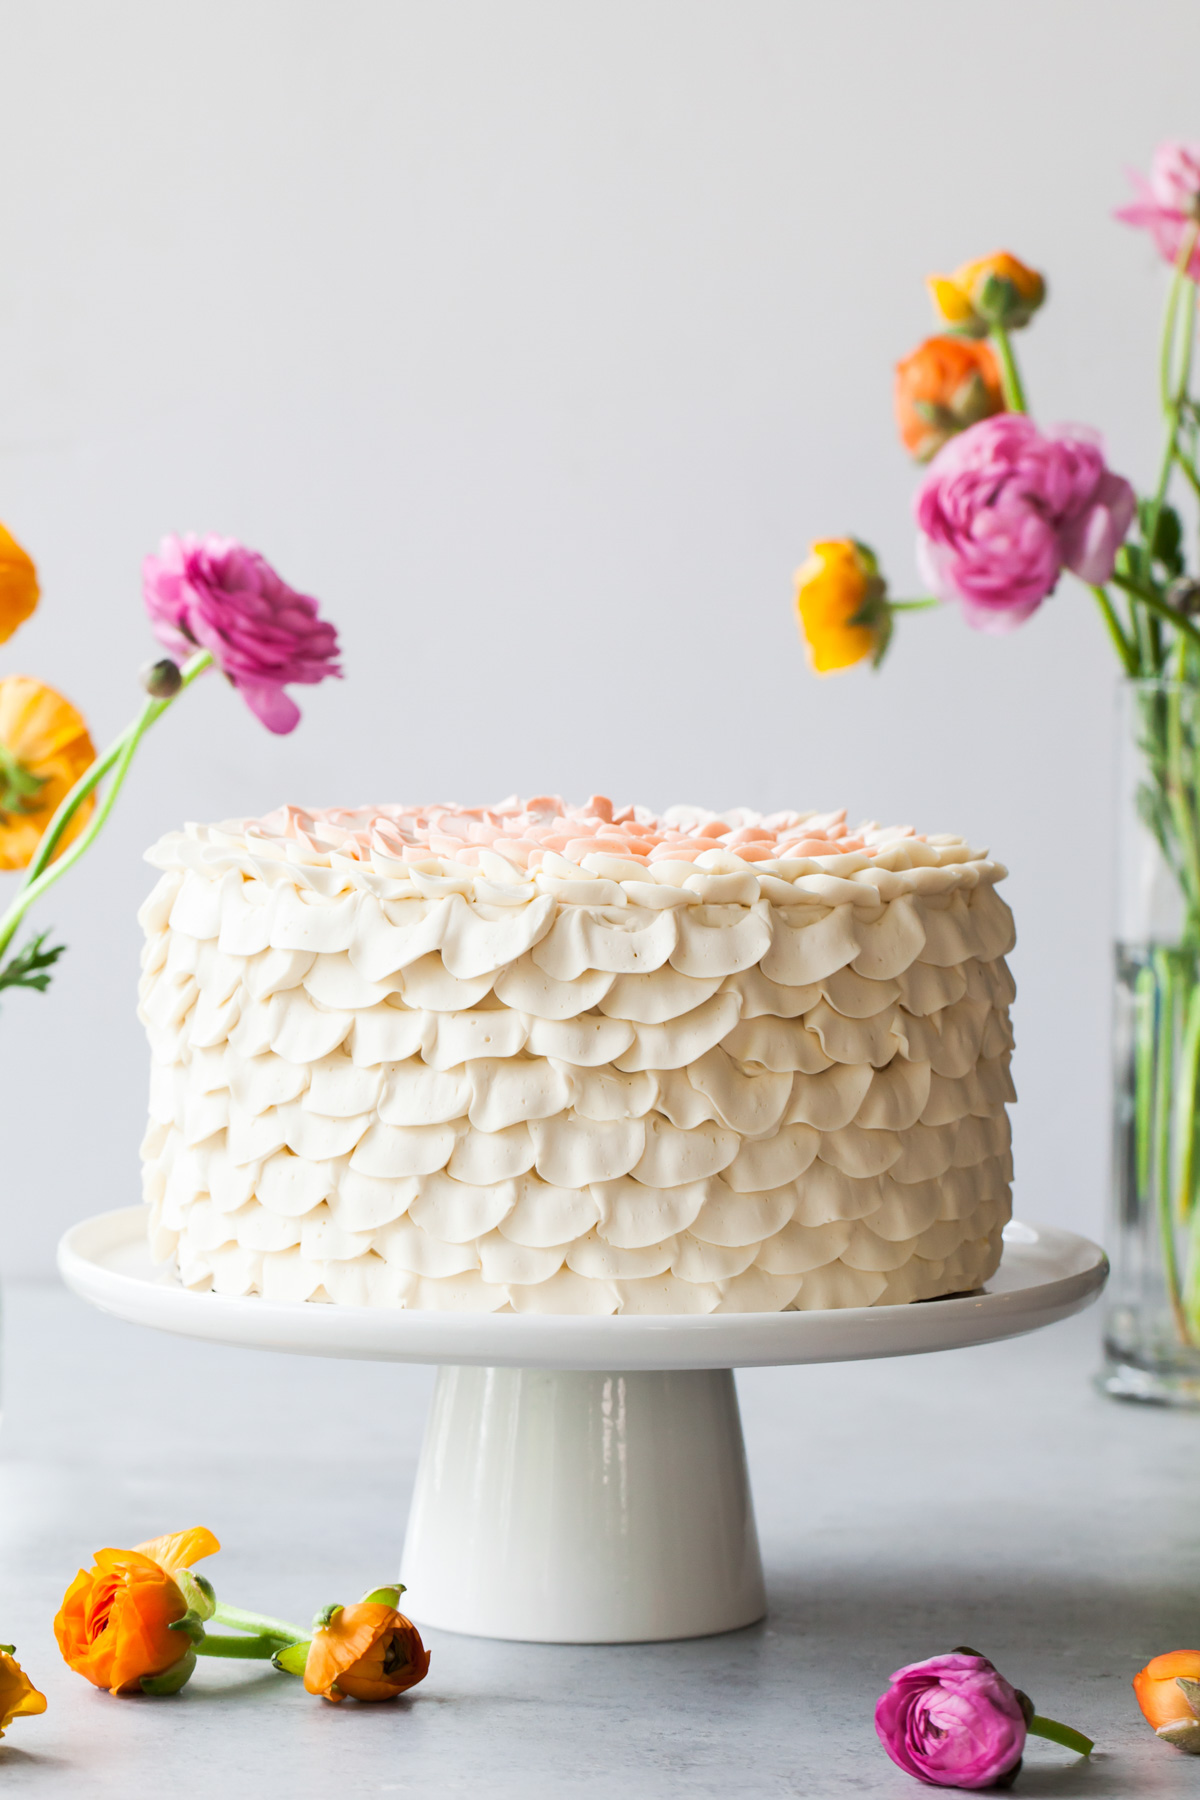 An orange salted honey cake with petal piped buttercream on a cake stand